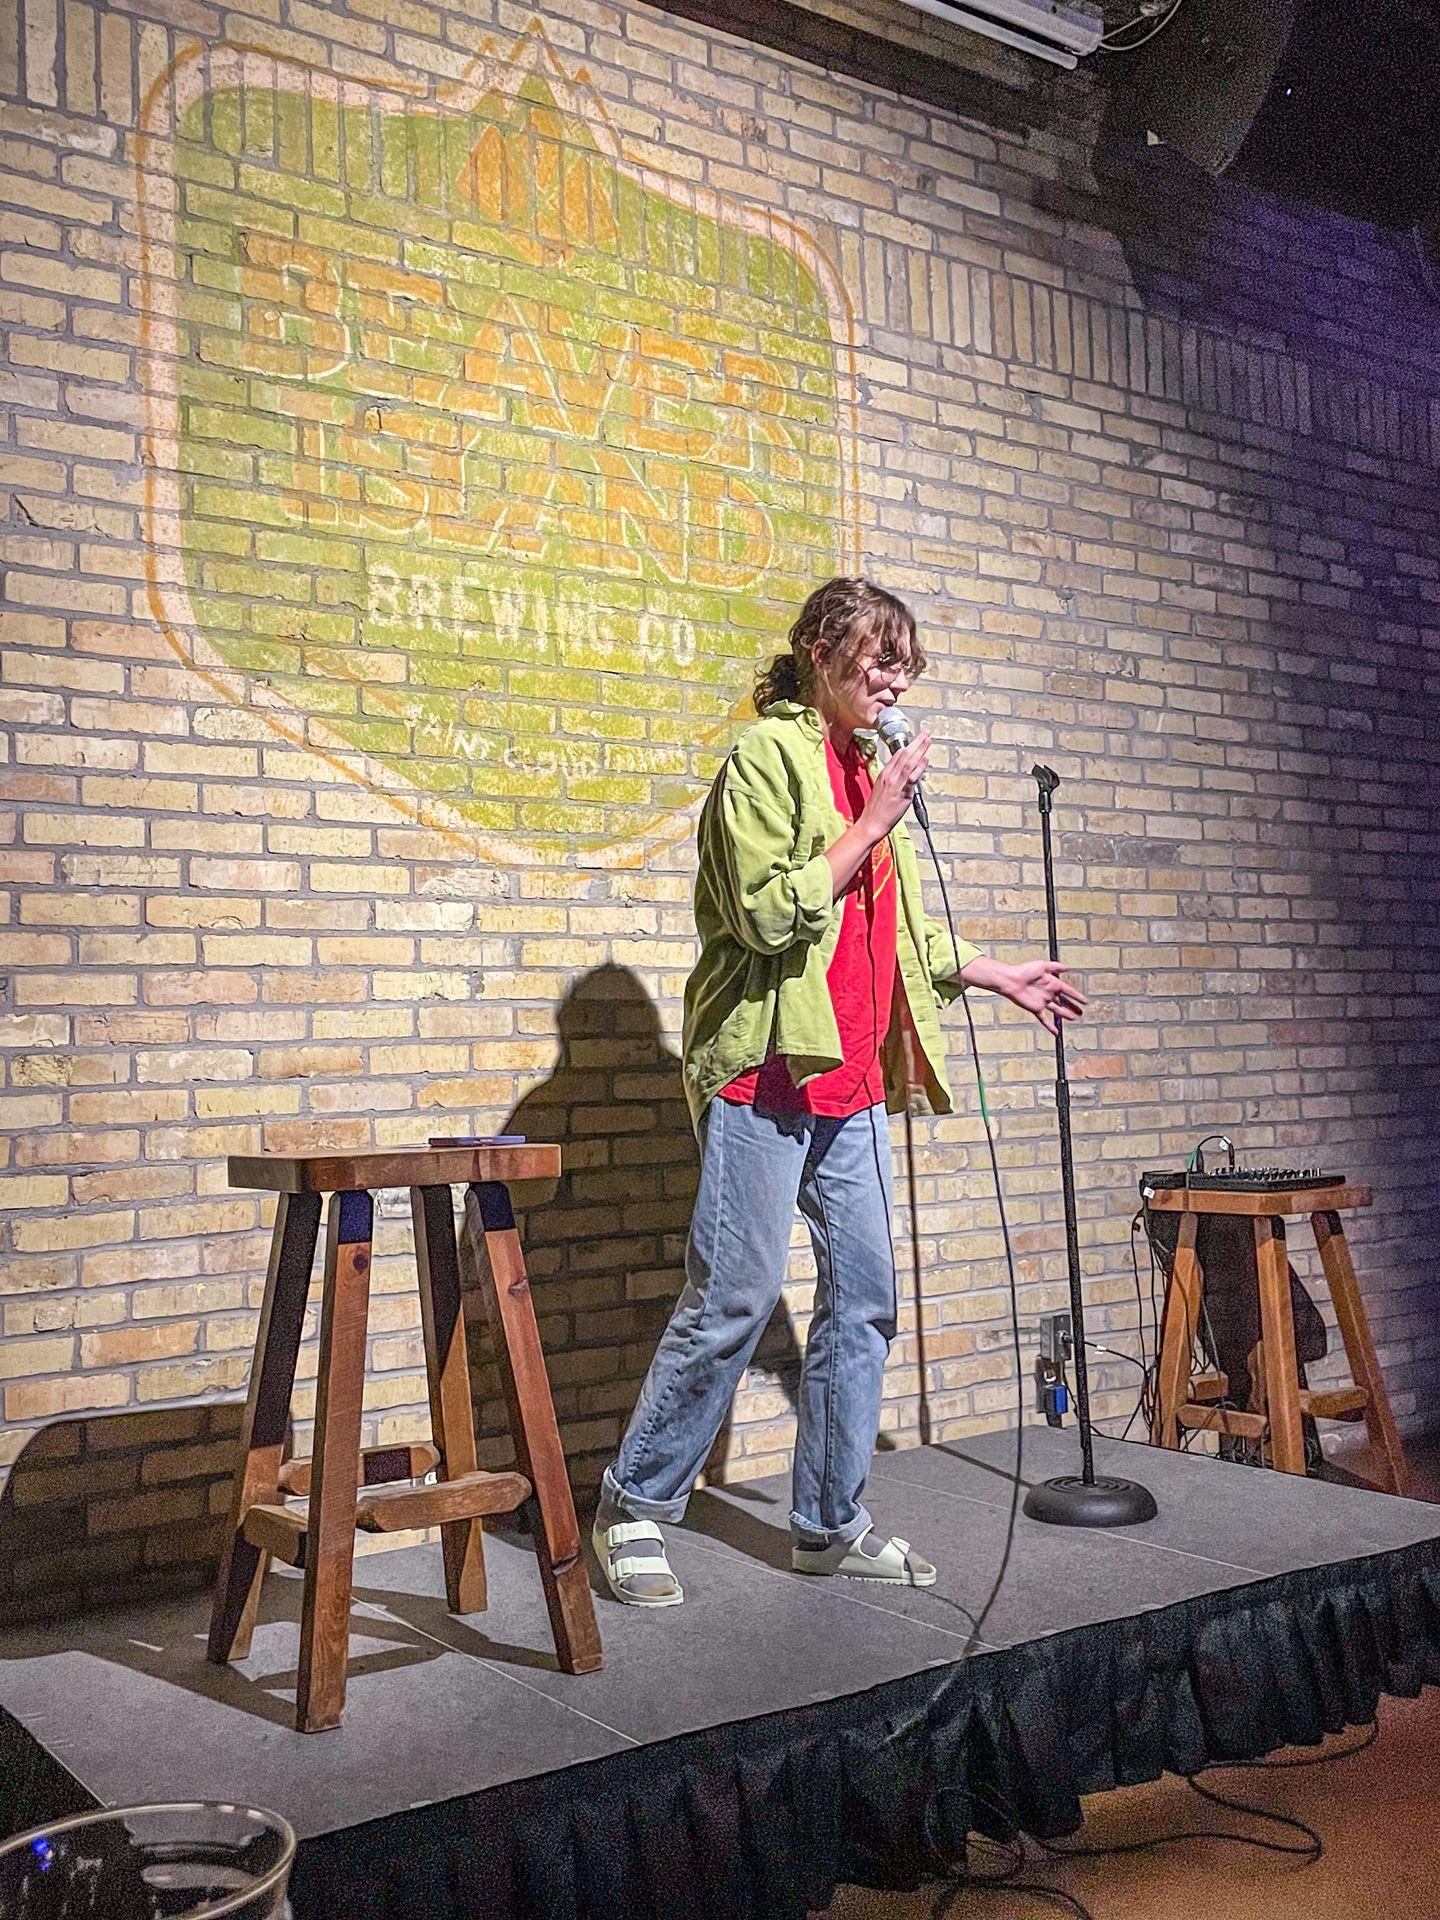 A comedian on stage at Beaver Island Brewing